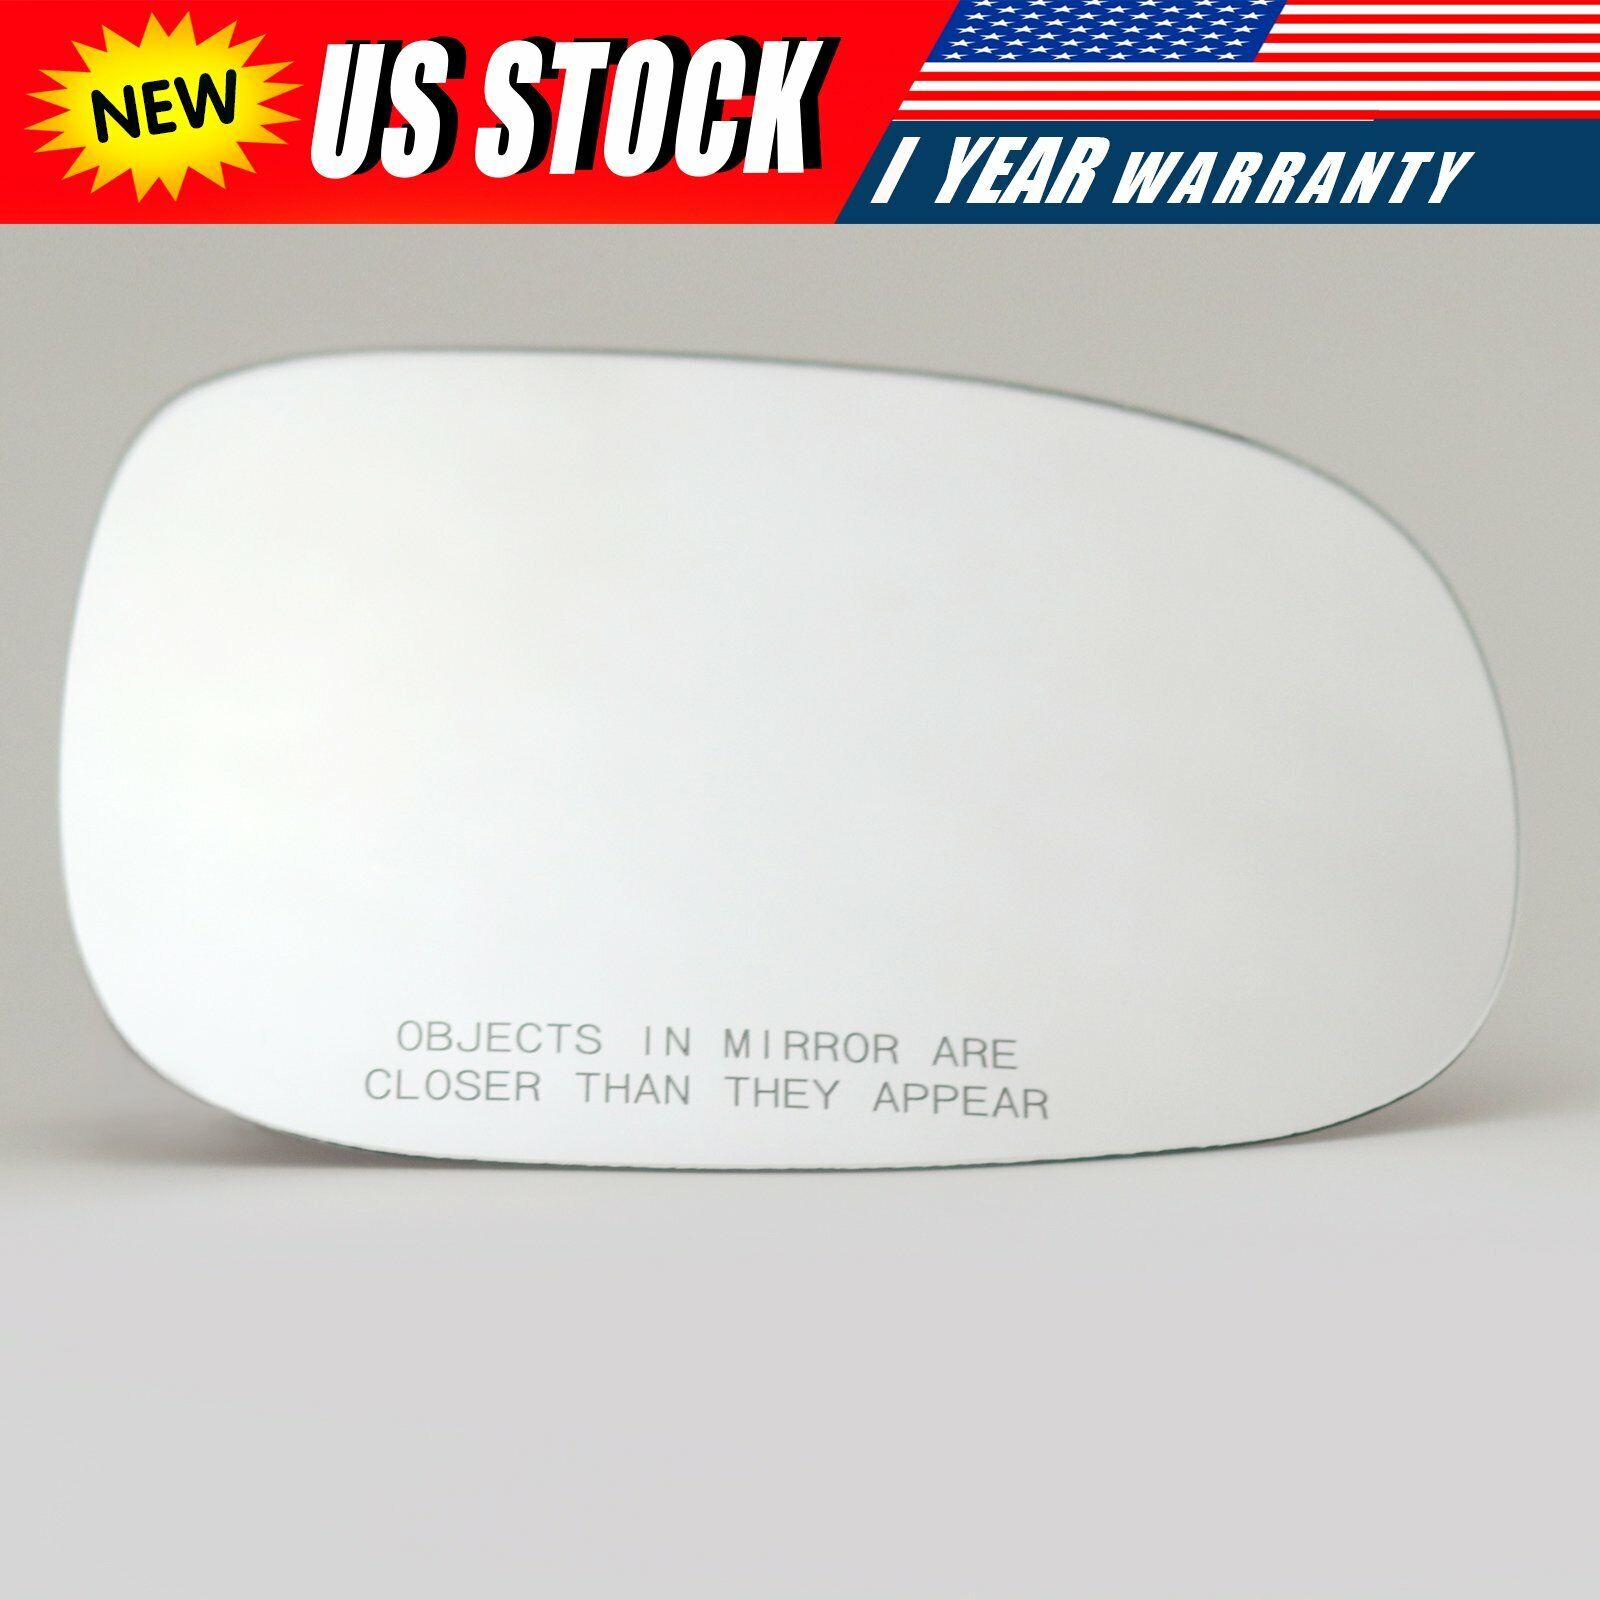 For Volvo C30 C70 S40 S60 S80 V50 Right Passenger Side Mirror Glass Adhesive